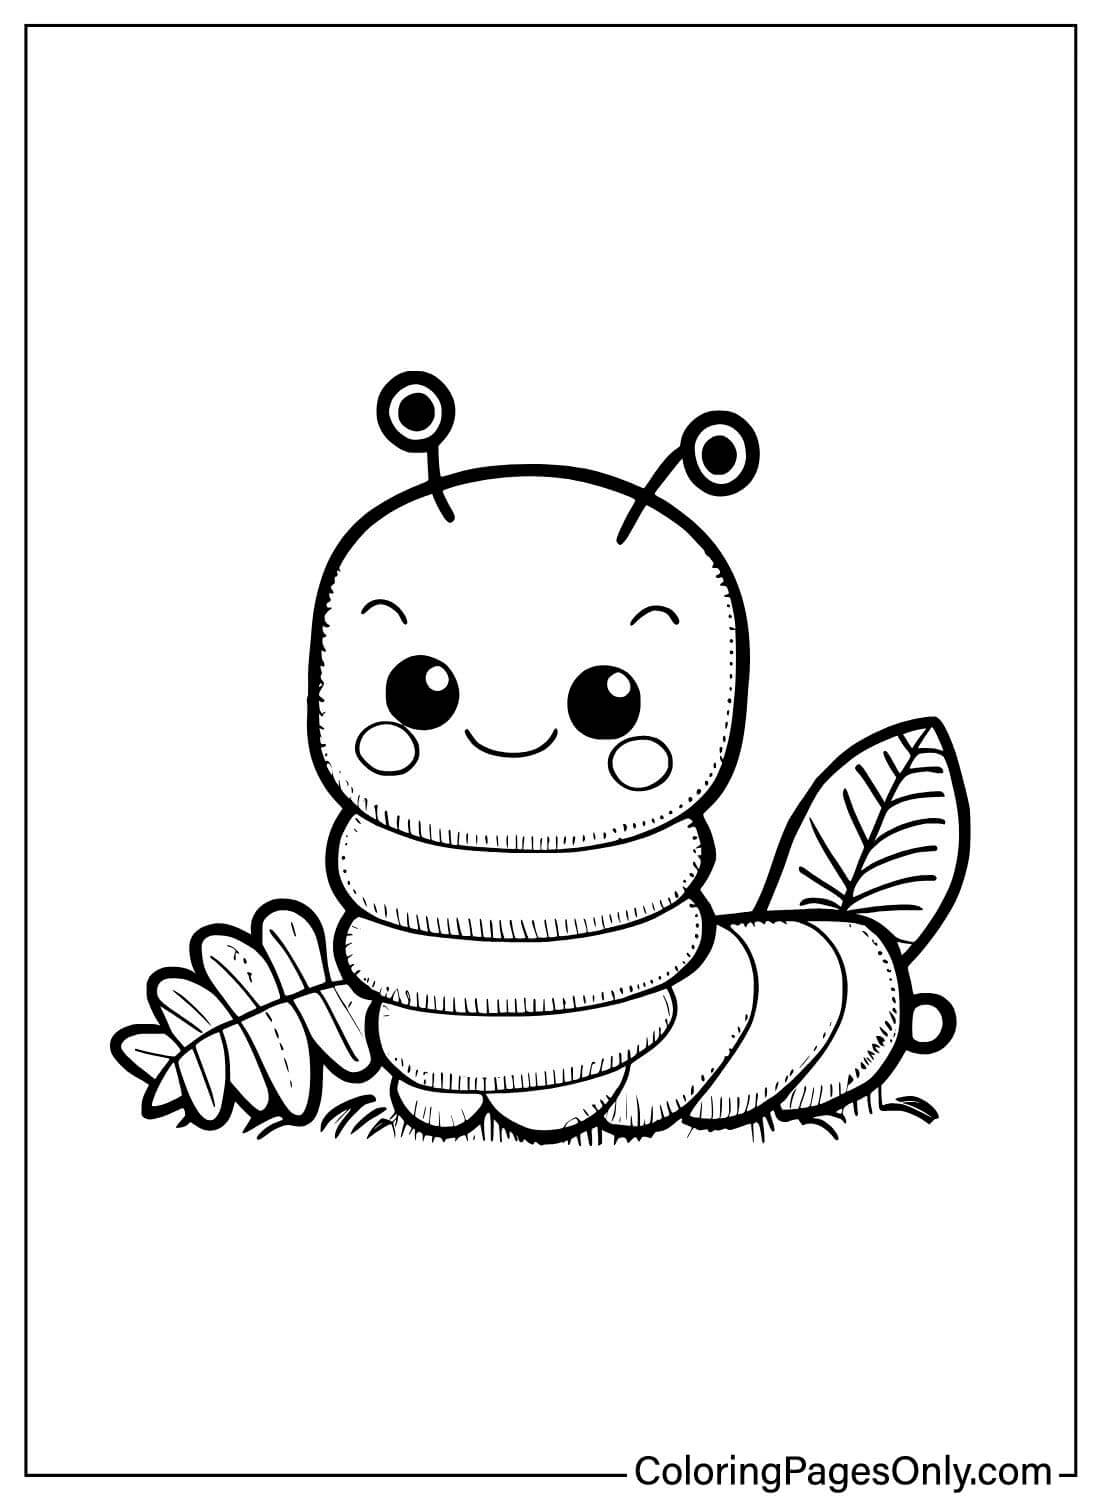 Caterpillar Free Coloring Page from Caterpillar